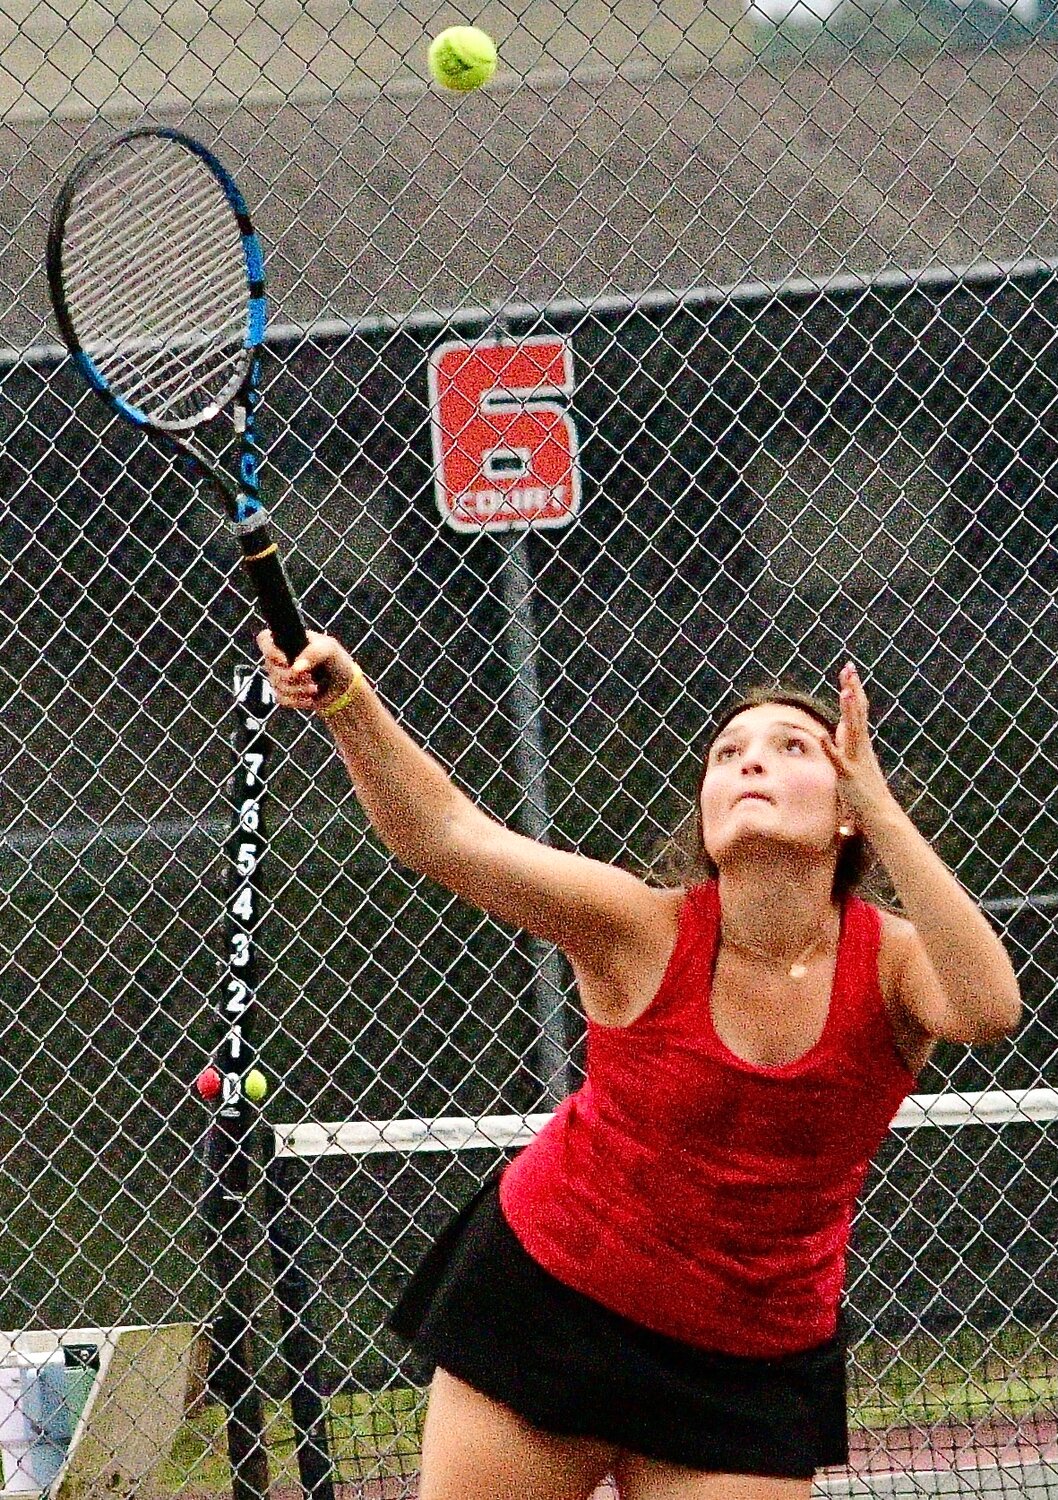 OZARK'S SERENA BROUSSARD reaches for a forehand return.